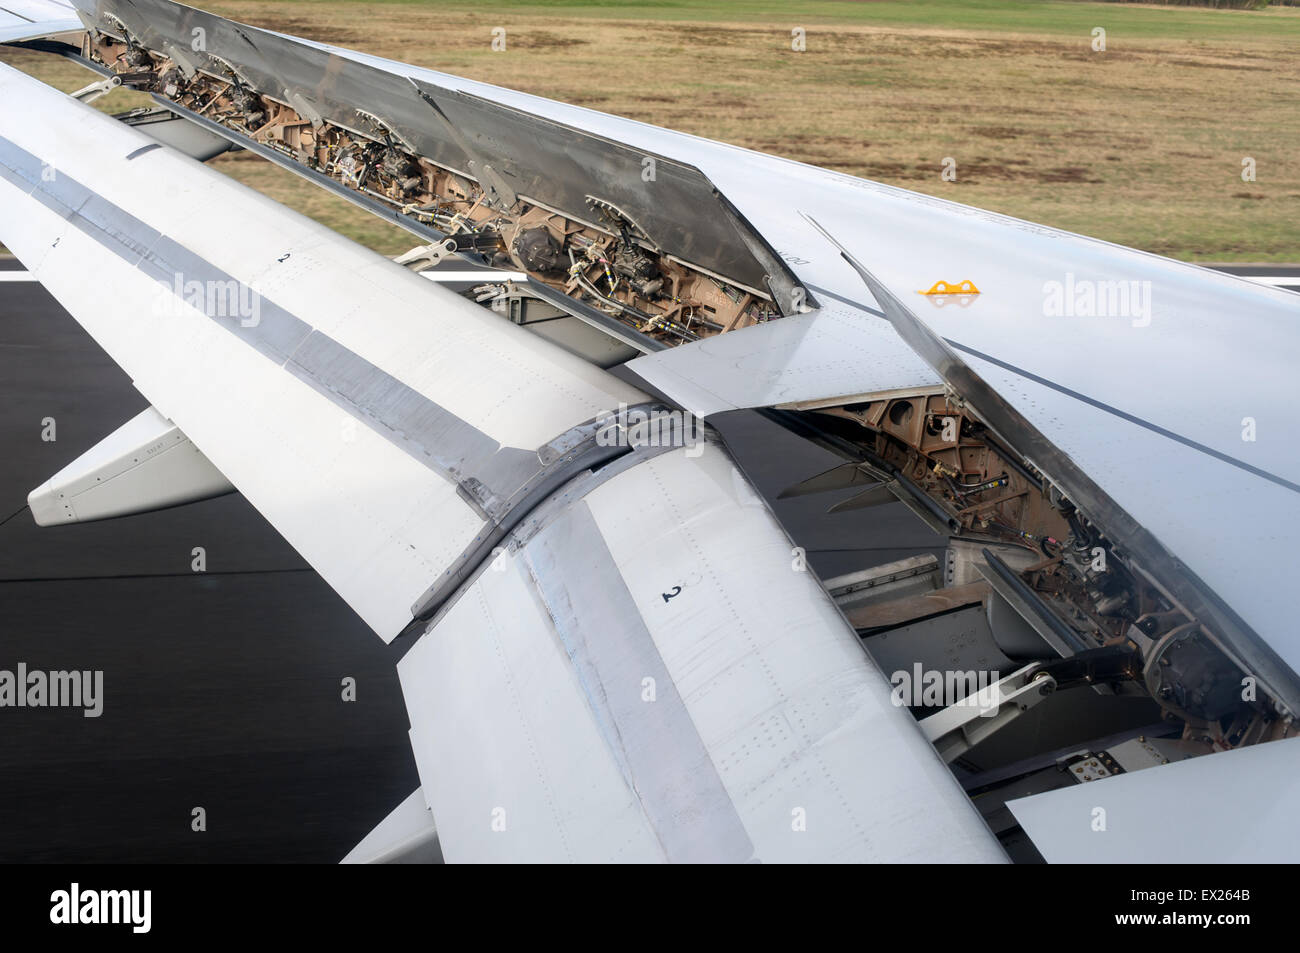 Airbus A319 with flaps in up posistion to slow down after landing Stock Photo